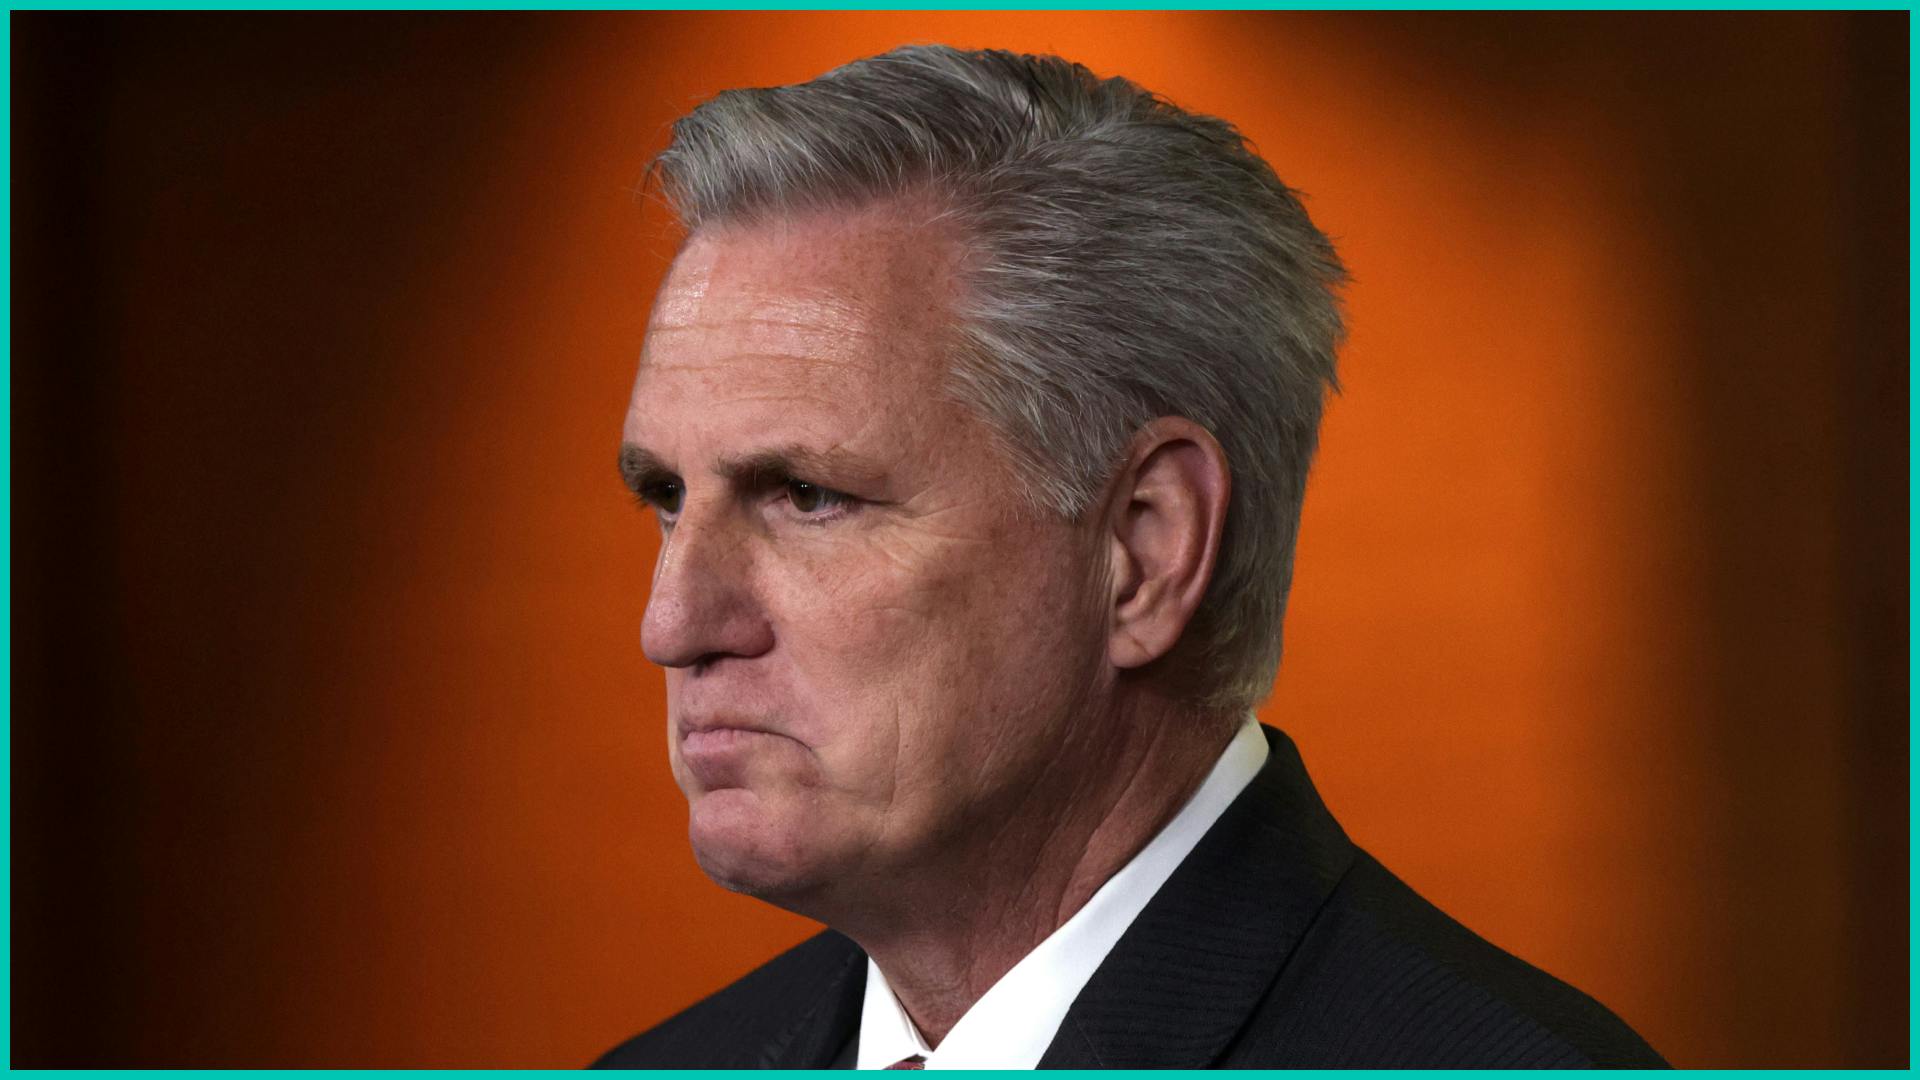 Rep. Kevin McCarthy (R-CA) speaks during a weekly news conference at the U.S. Capitol July 01, 2021